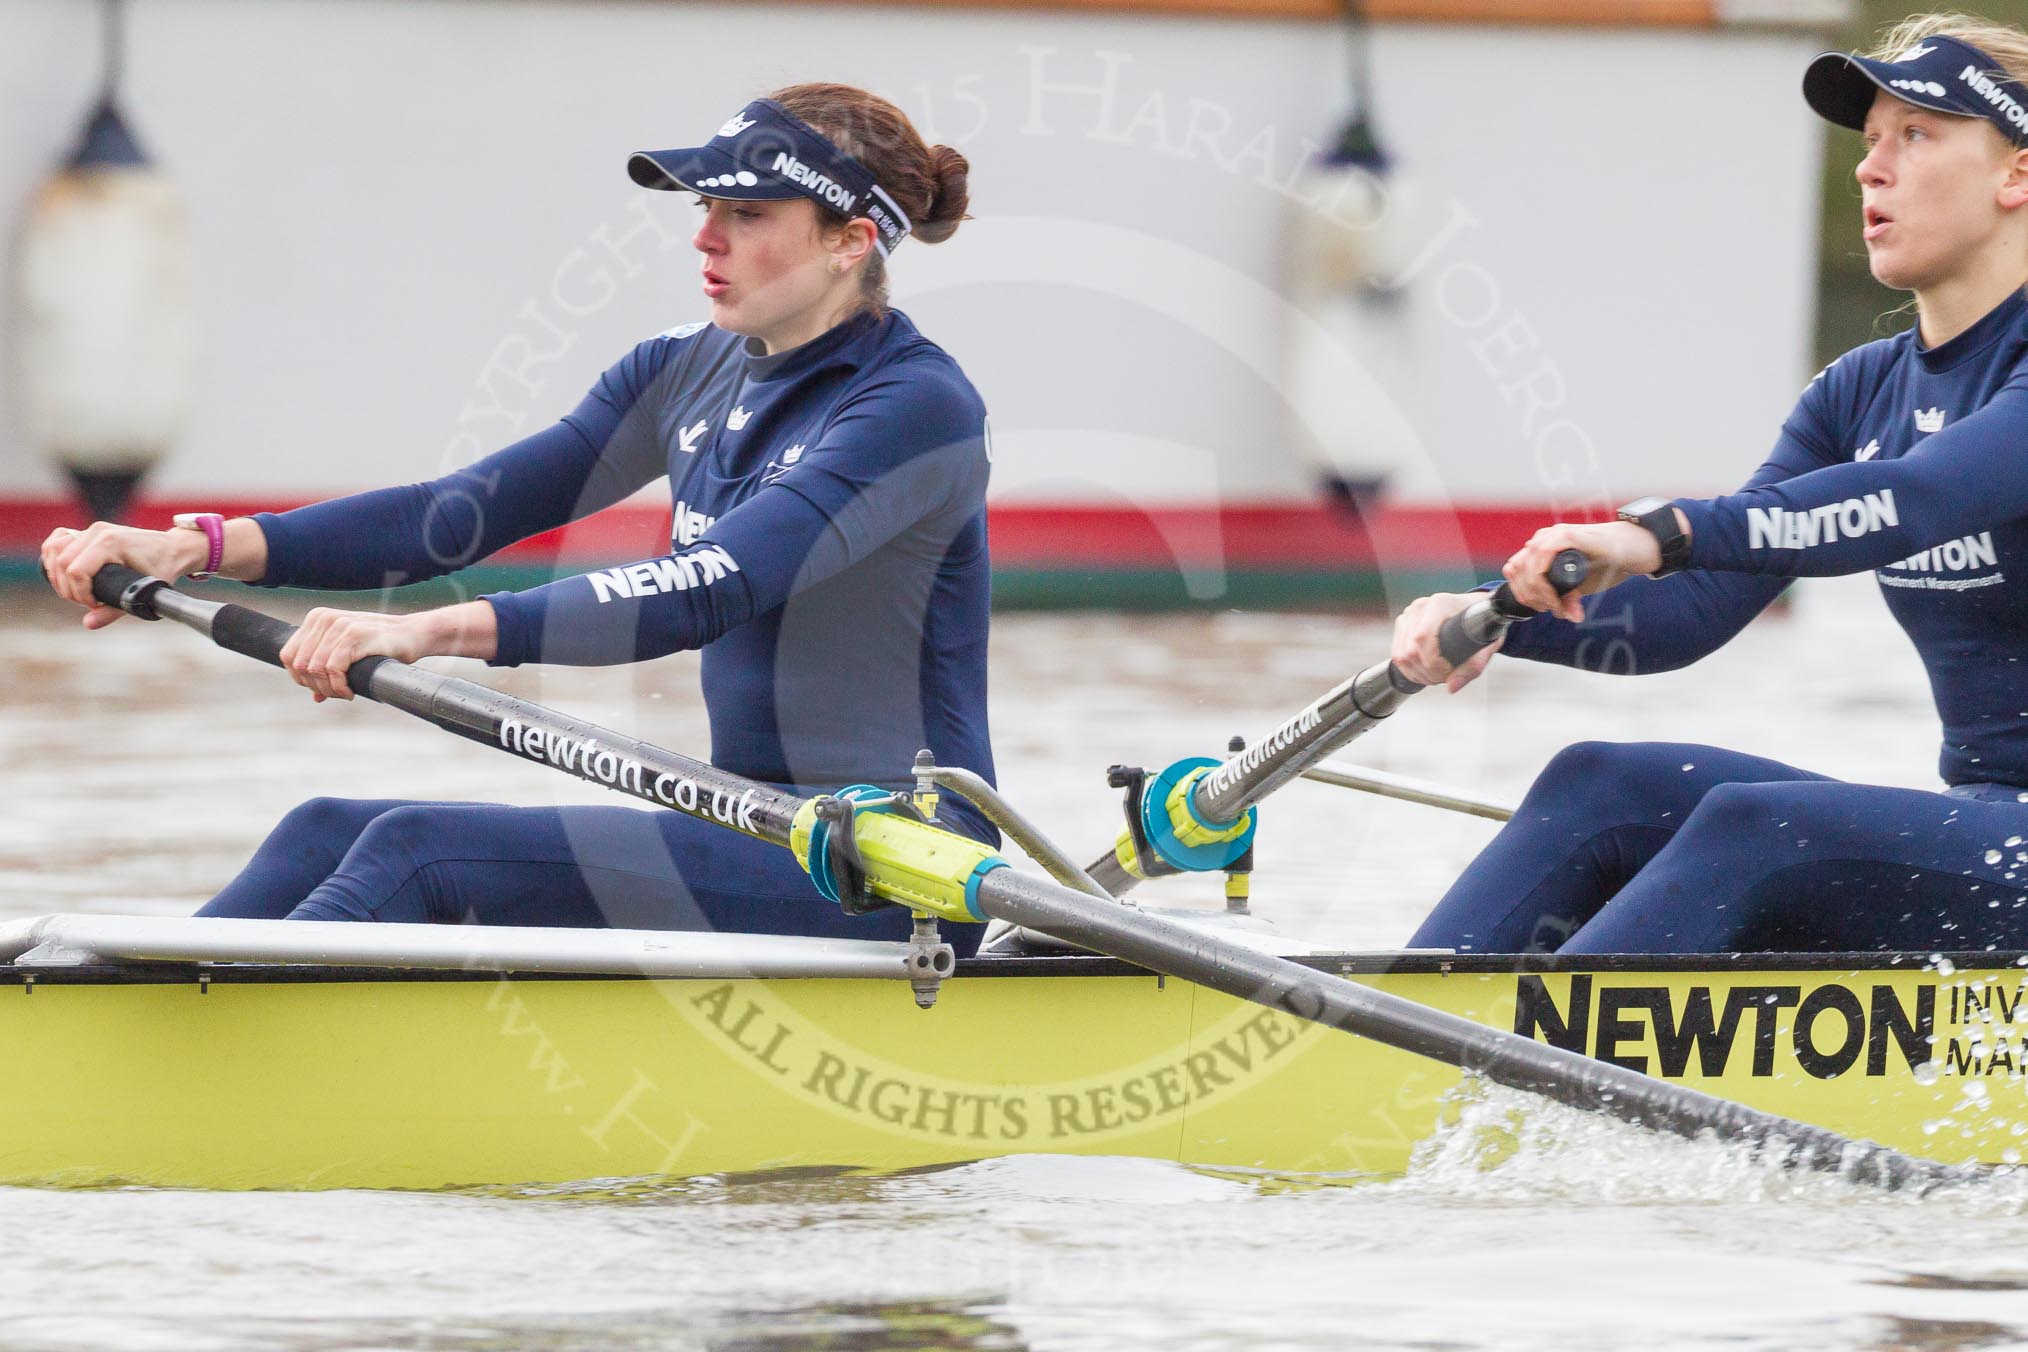 The Boat Race season 2016 - Women's Boat Race Trial Eights (OUWBC, Oxford): "Charybdis", 7-Maddy Badcott, 6-Elo Luik.
River Thames between Putney Bridge and Mortlake,
London SW15,

United Kingdom,
on 10 December 2015 at 12:18, image #149